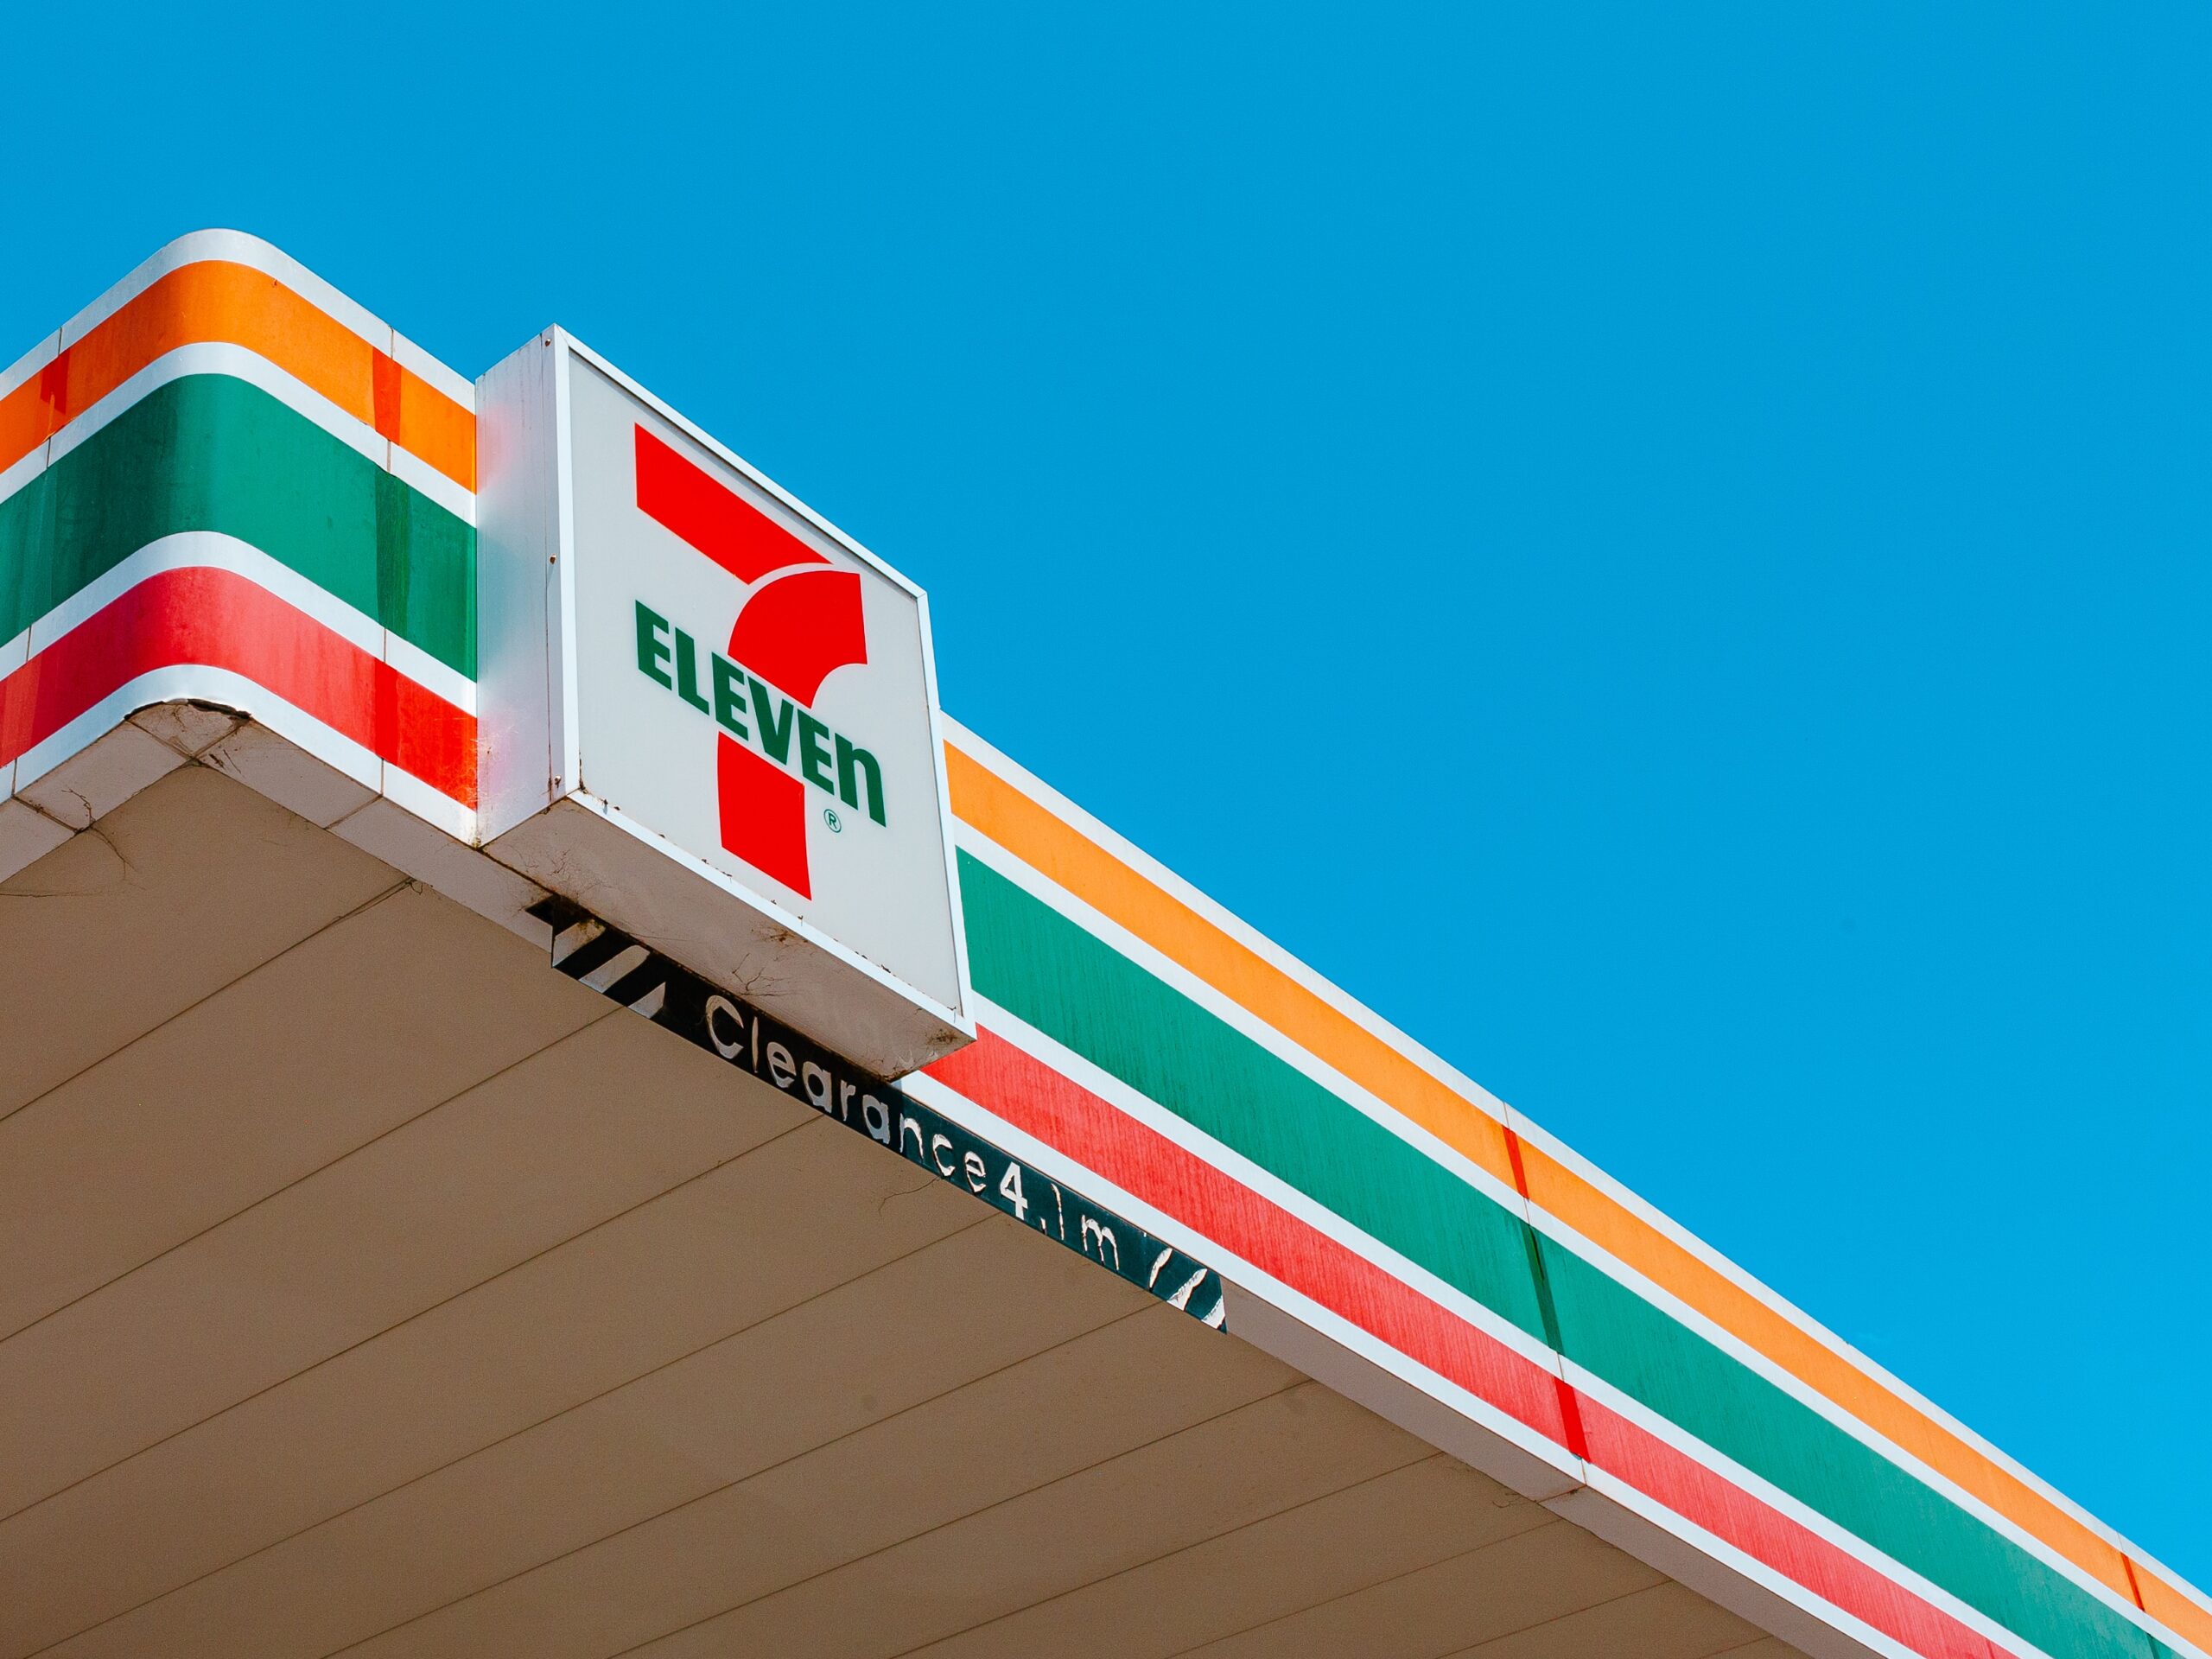 7-eleven store front